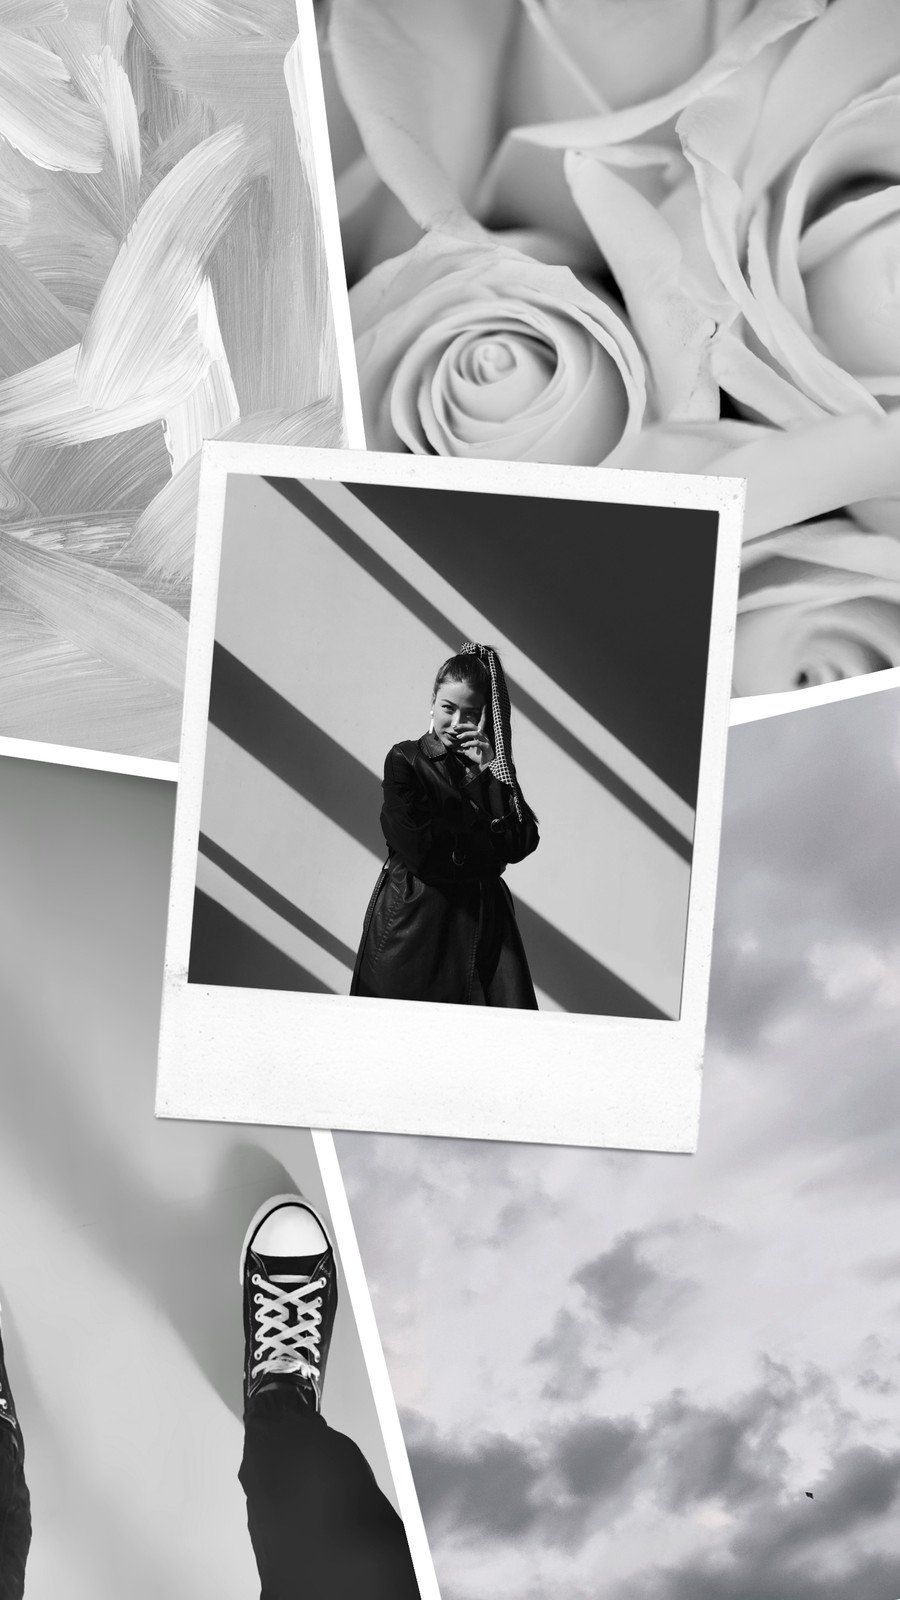 A collage of polaroid pictures of a woman, roses, converse shoes, and clouds. - Clean